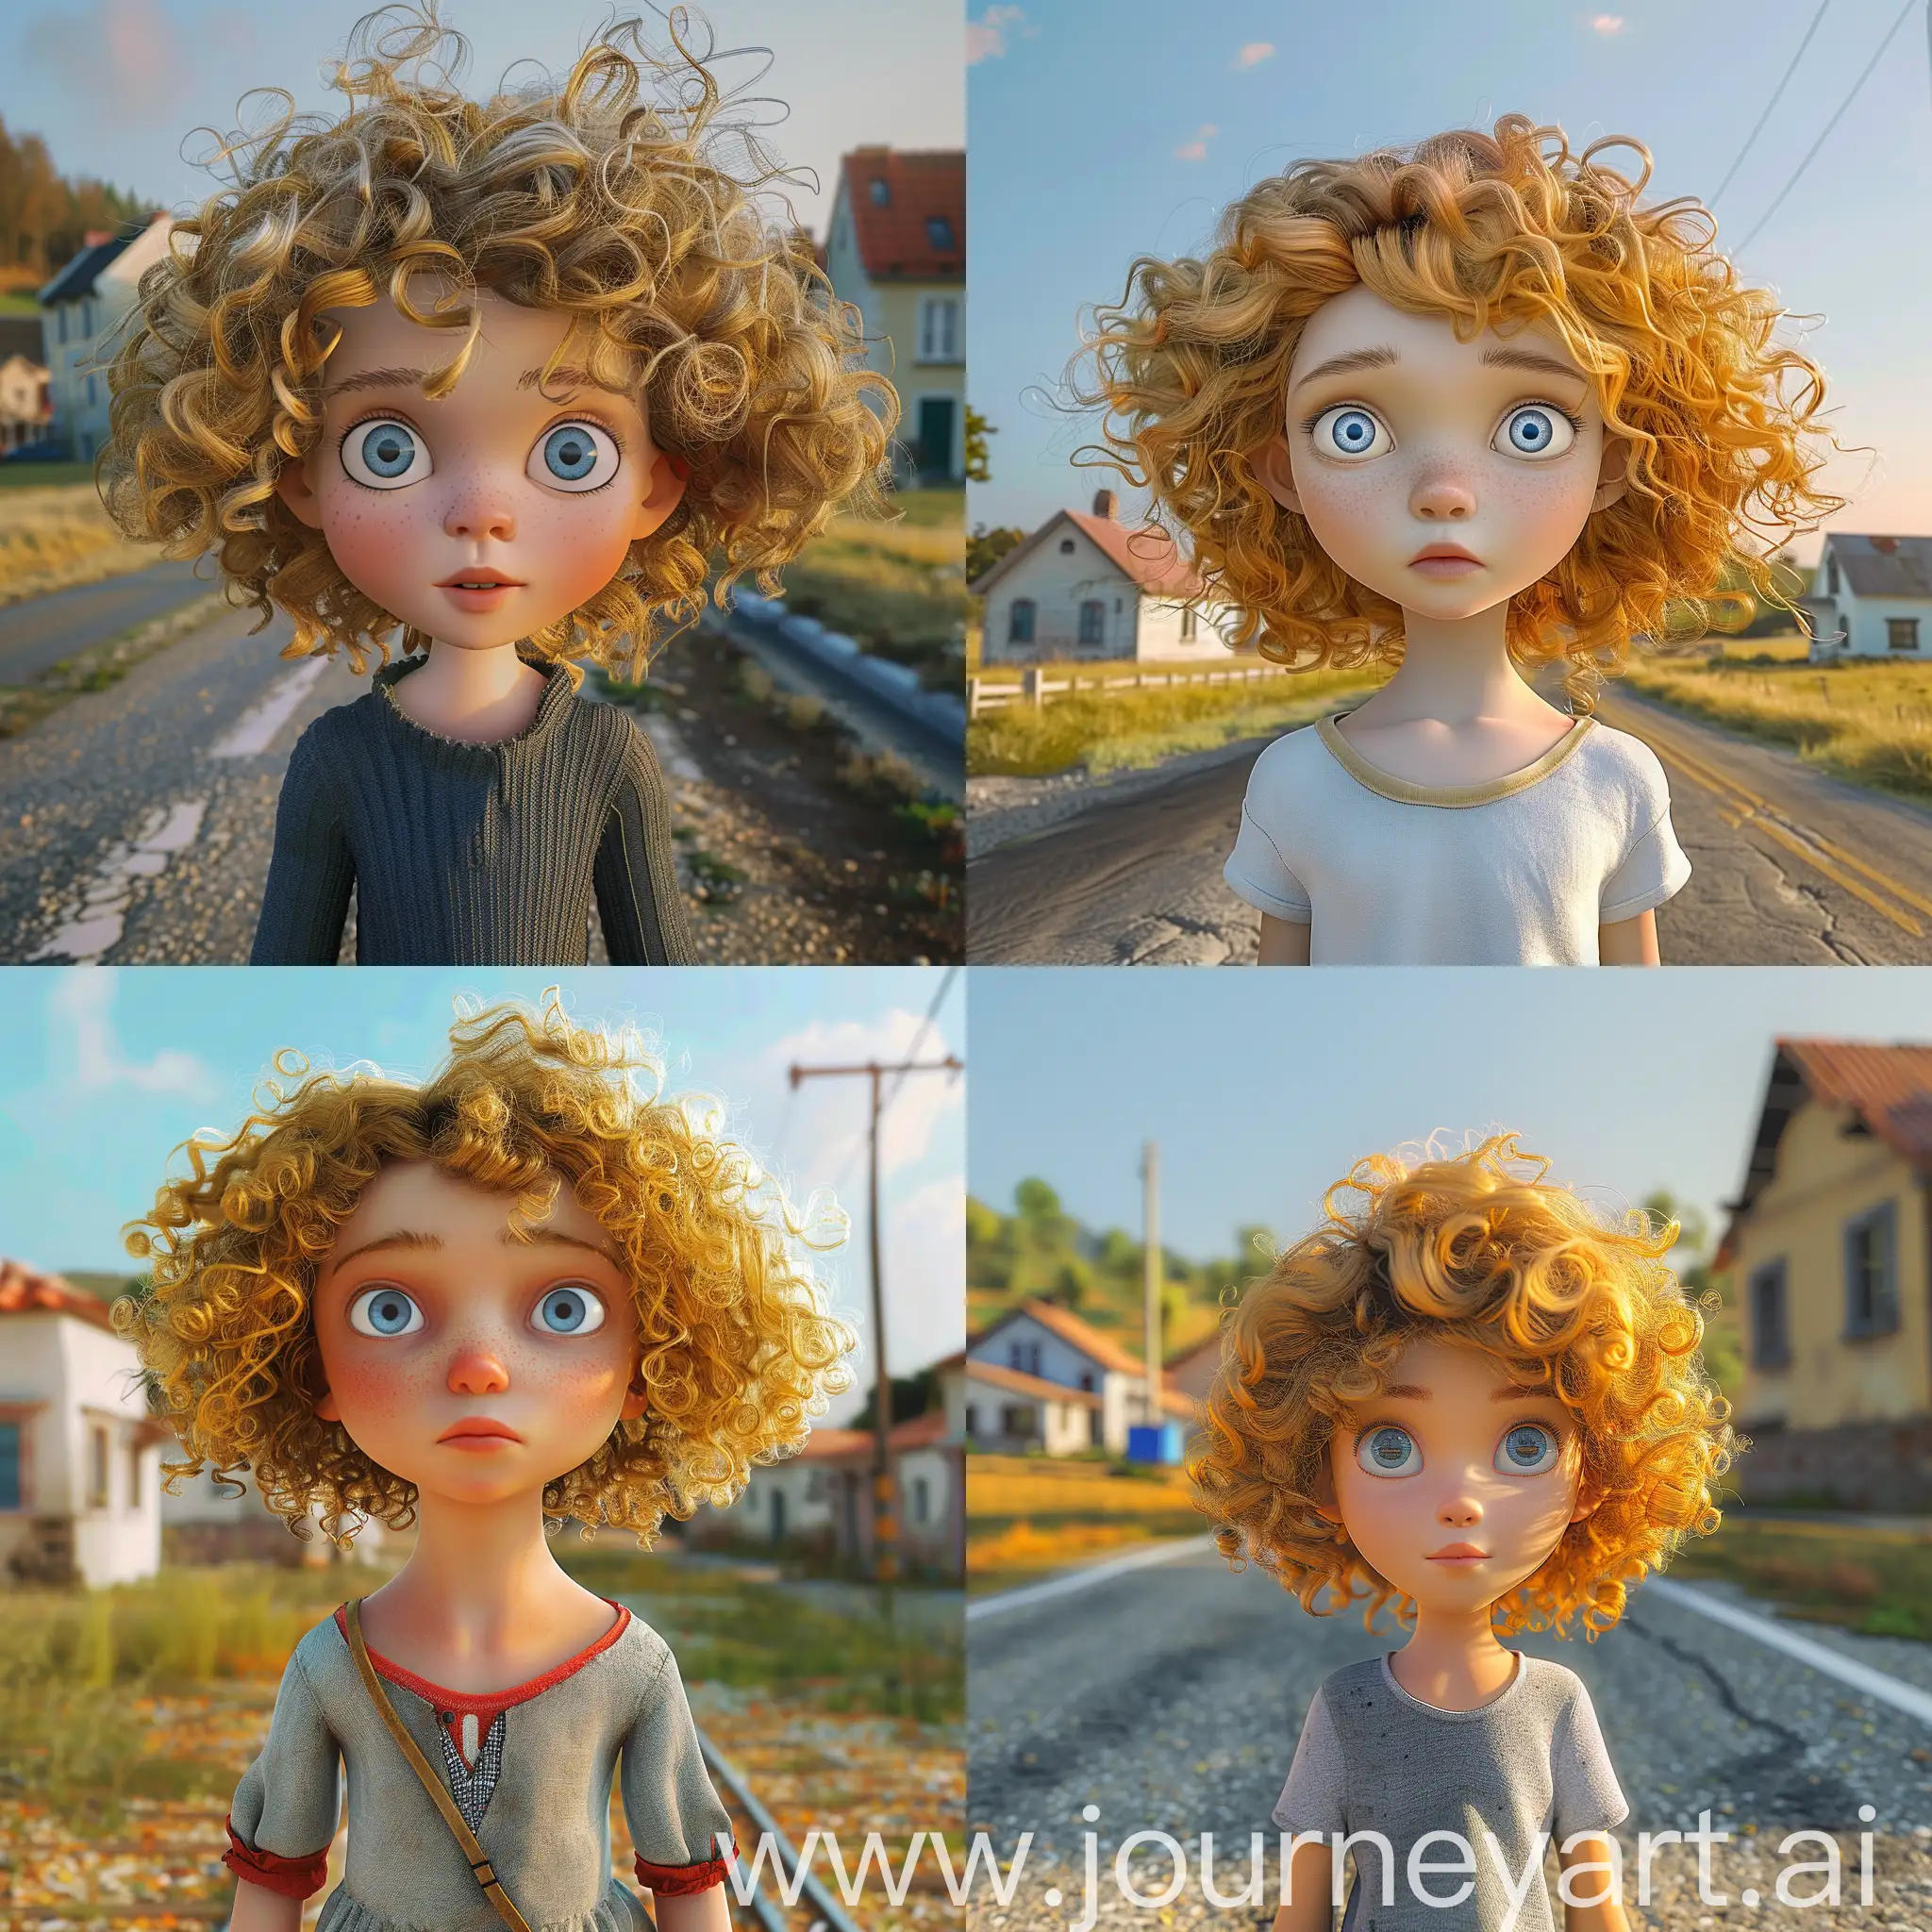 Golden-CurlyHaired-Girl-in-PixarStyle-Small-Town-Scene